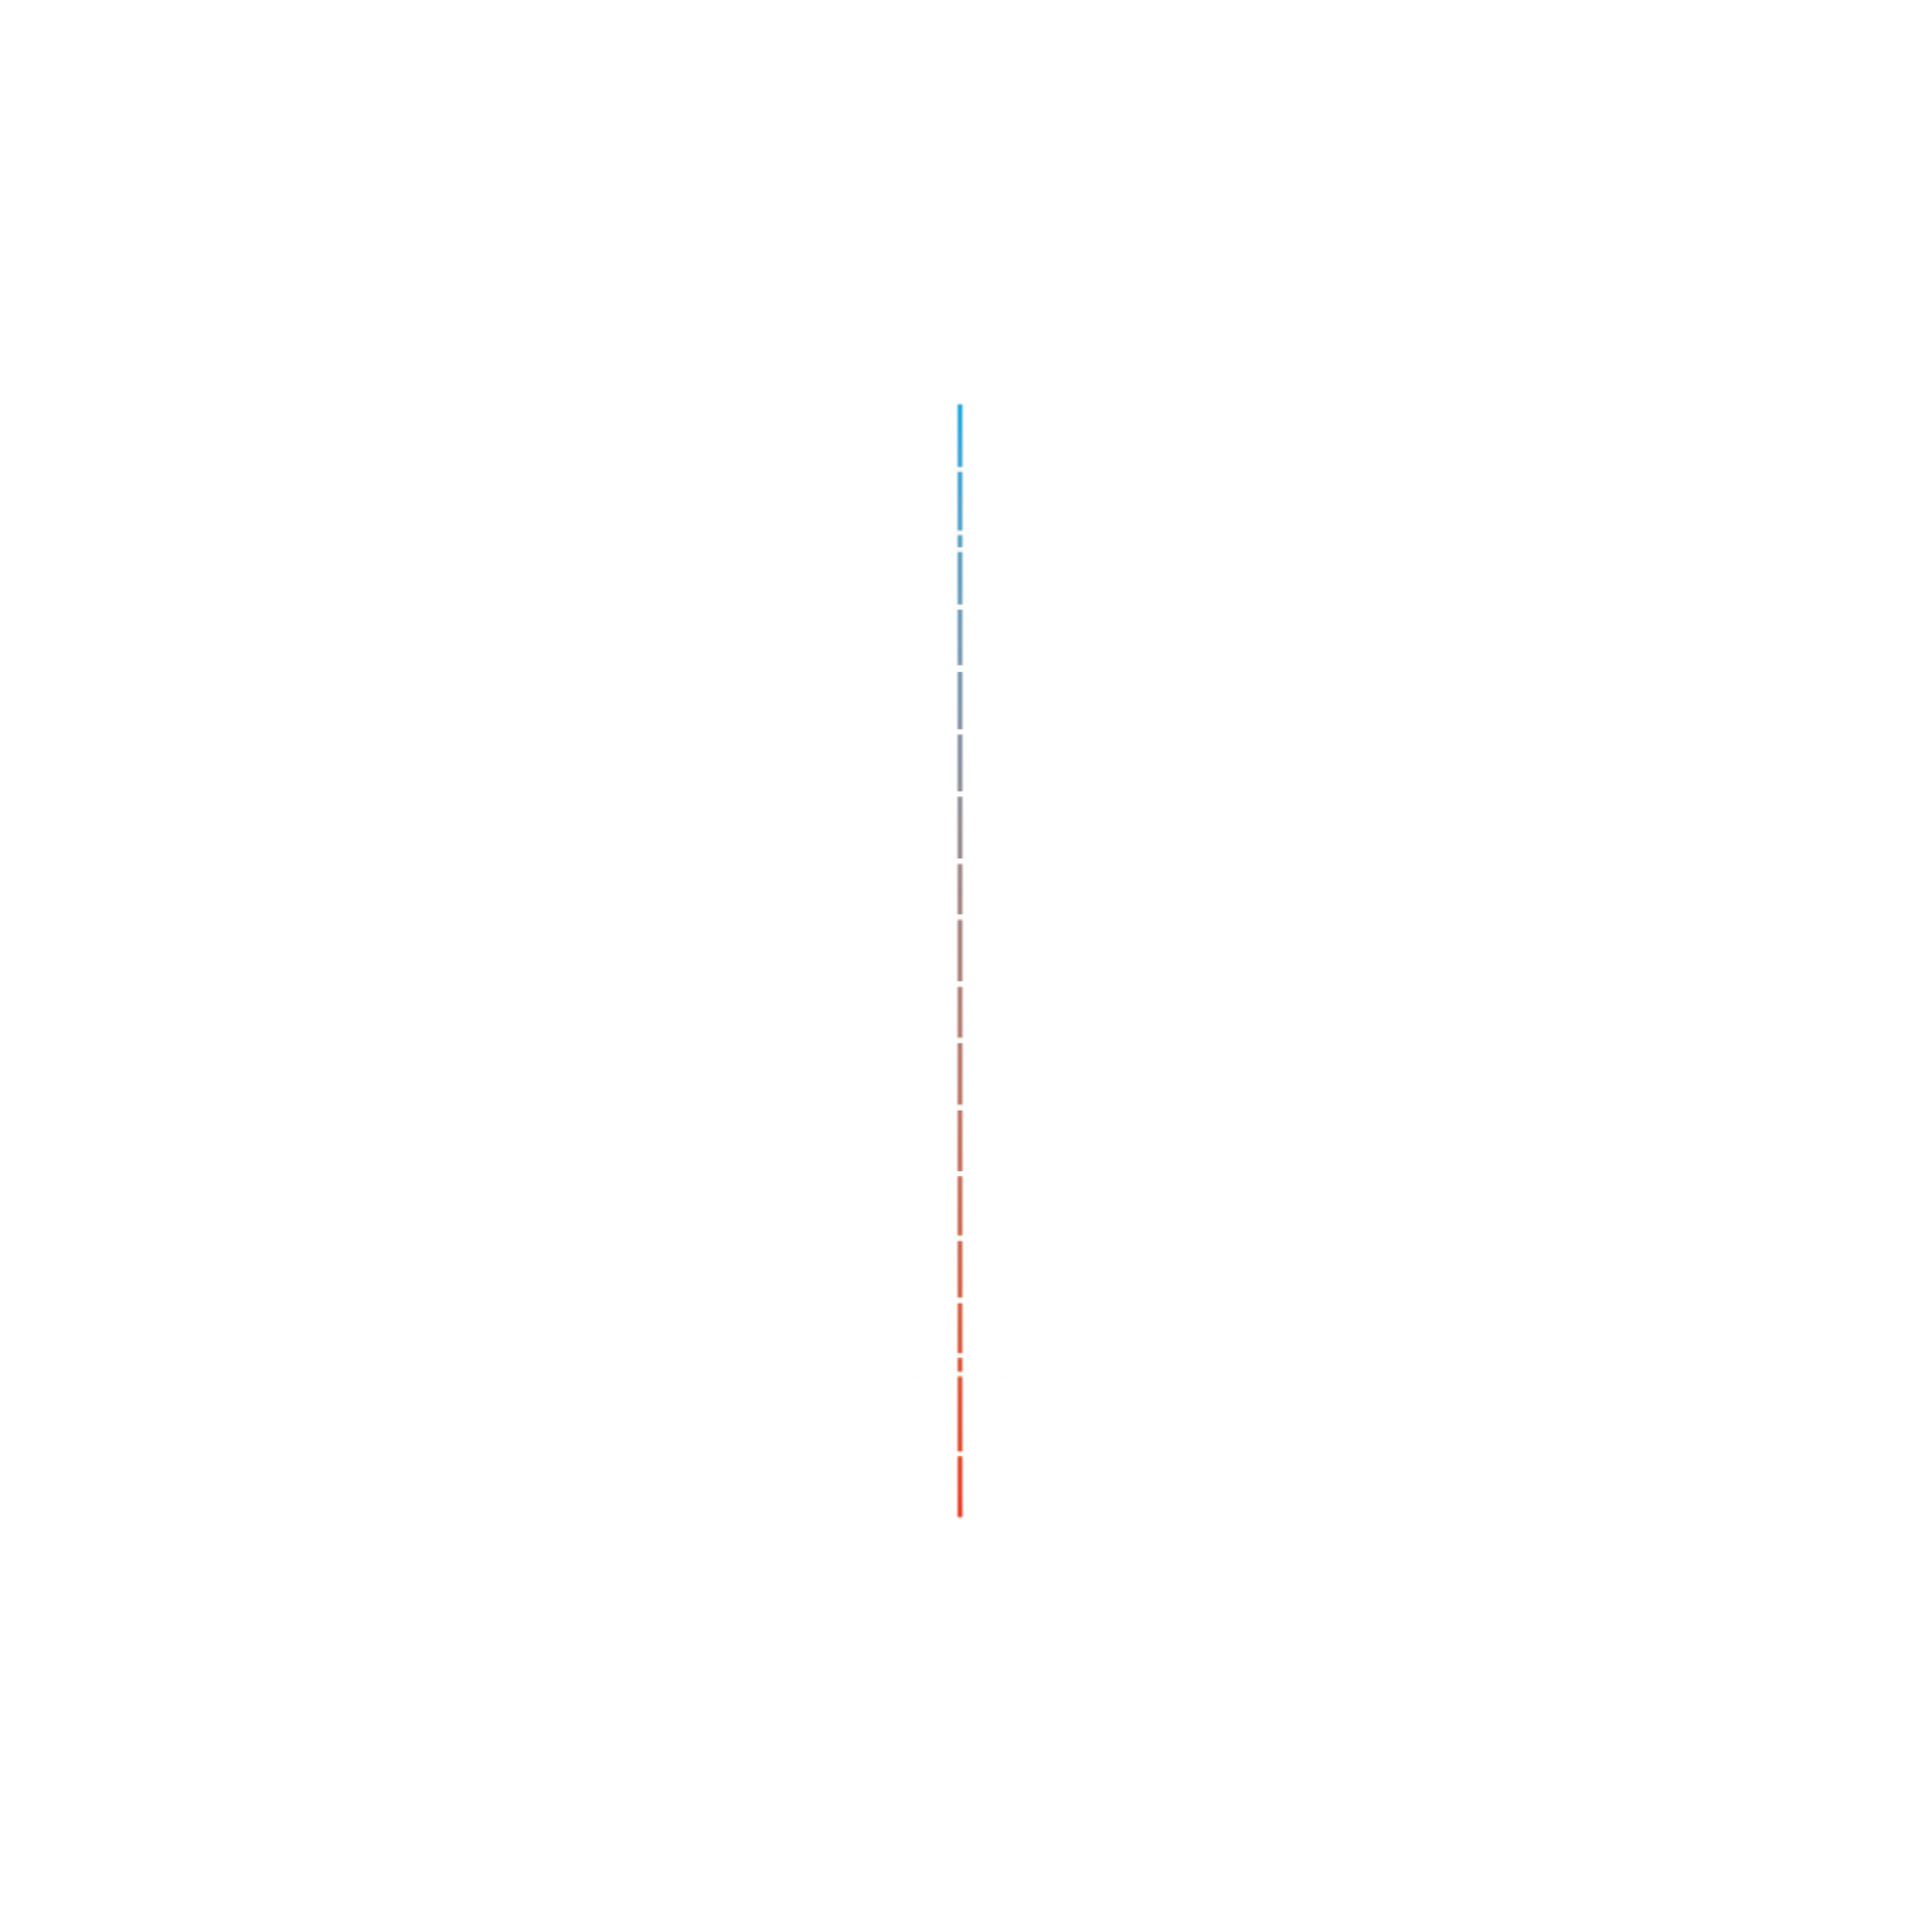 Illustration featuring cylindrical grid with red/blue line showing pressure buildup reduction that encourages healthy movement on black background.